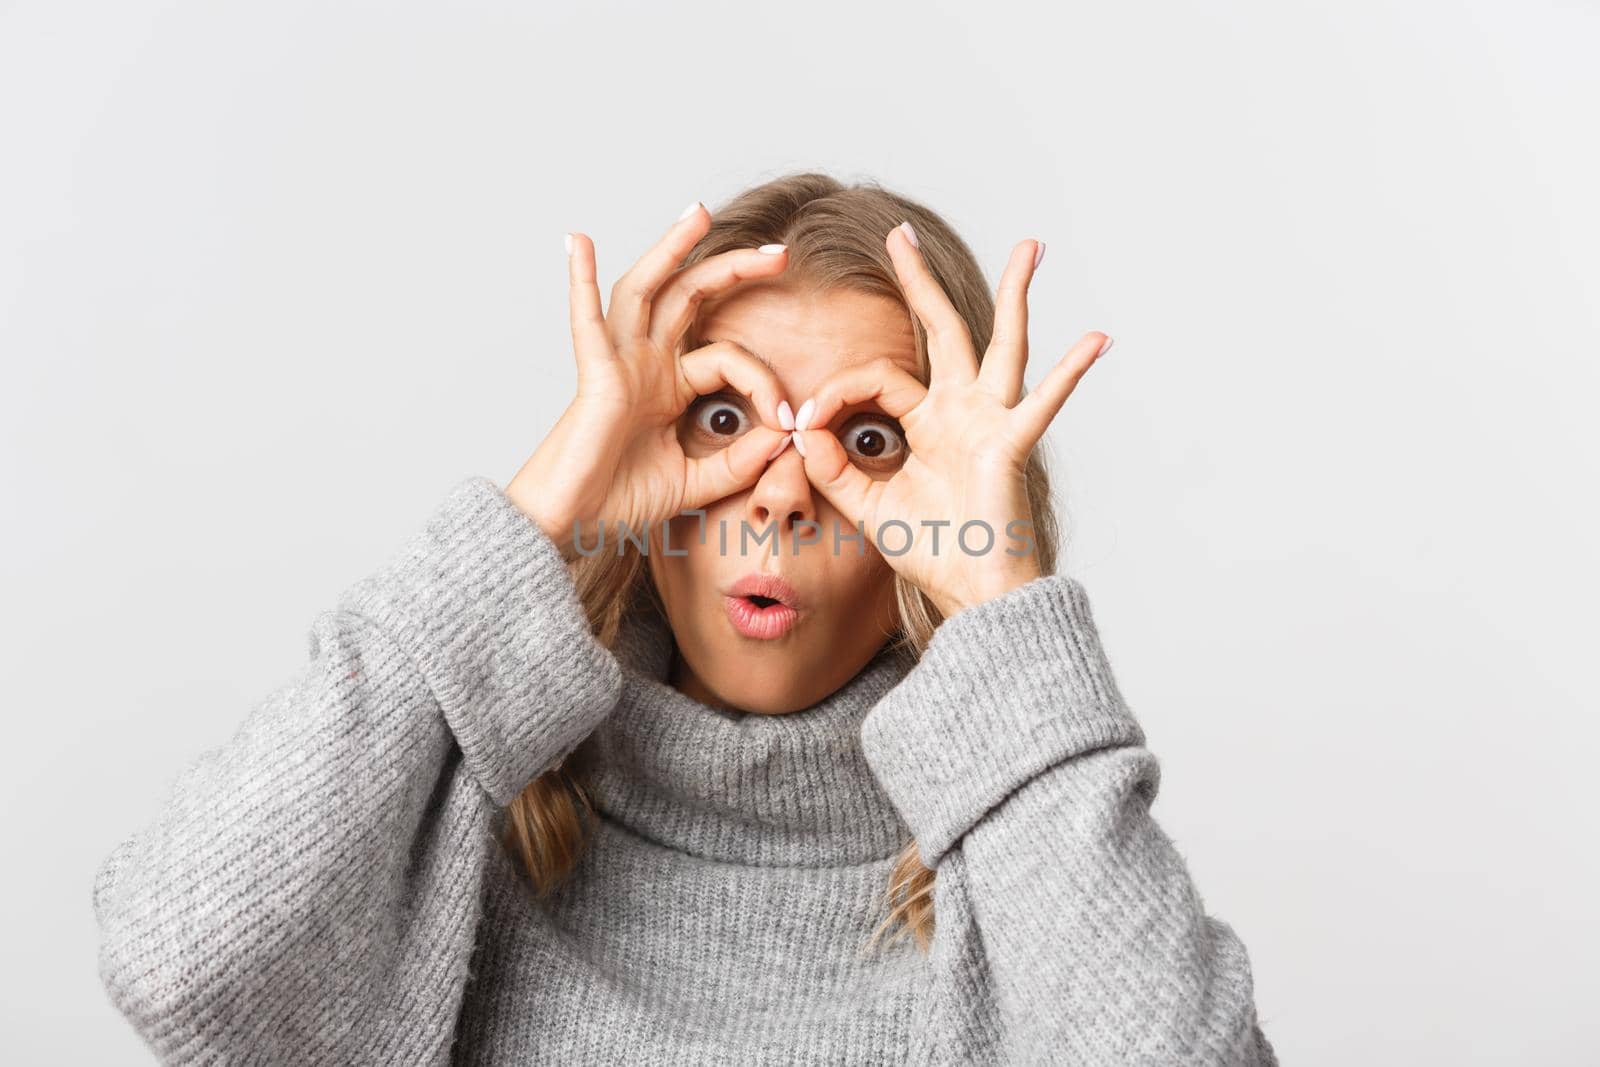 Close-up of beautiful cute girl with blond short hairstyle, making finger glasses and fooling around, standing over white background.